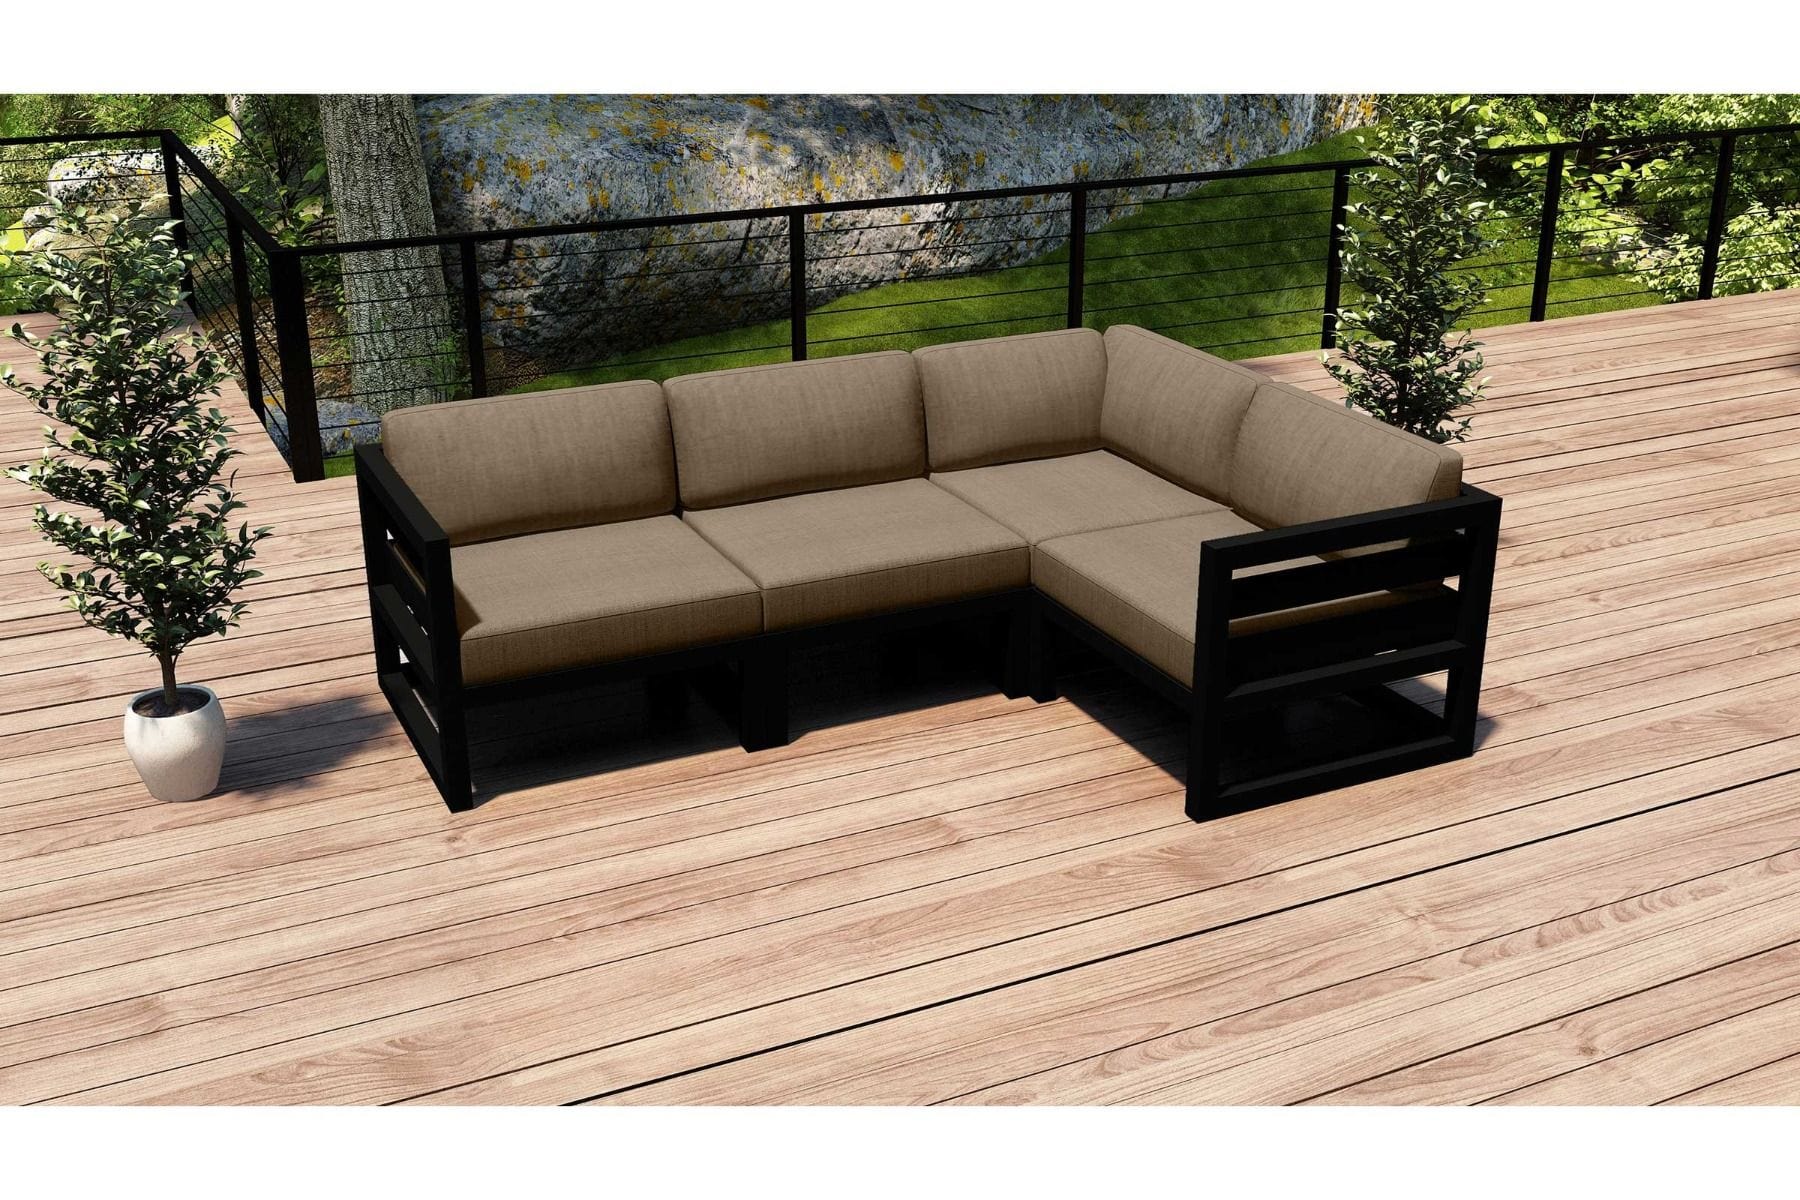 Harmonia Living Outdoor Sectional Heather Beige (HB) Harmonia Living - Avion 4 Piece Sectional Set | Corner, Middle, Left and Right | Fabric Sunbrella | HL-AVN-BK-4SEC